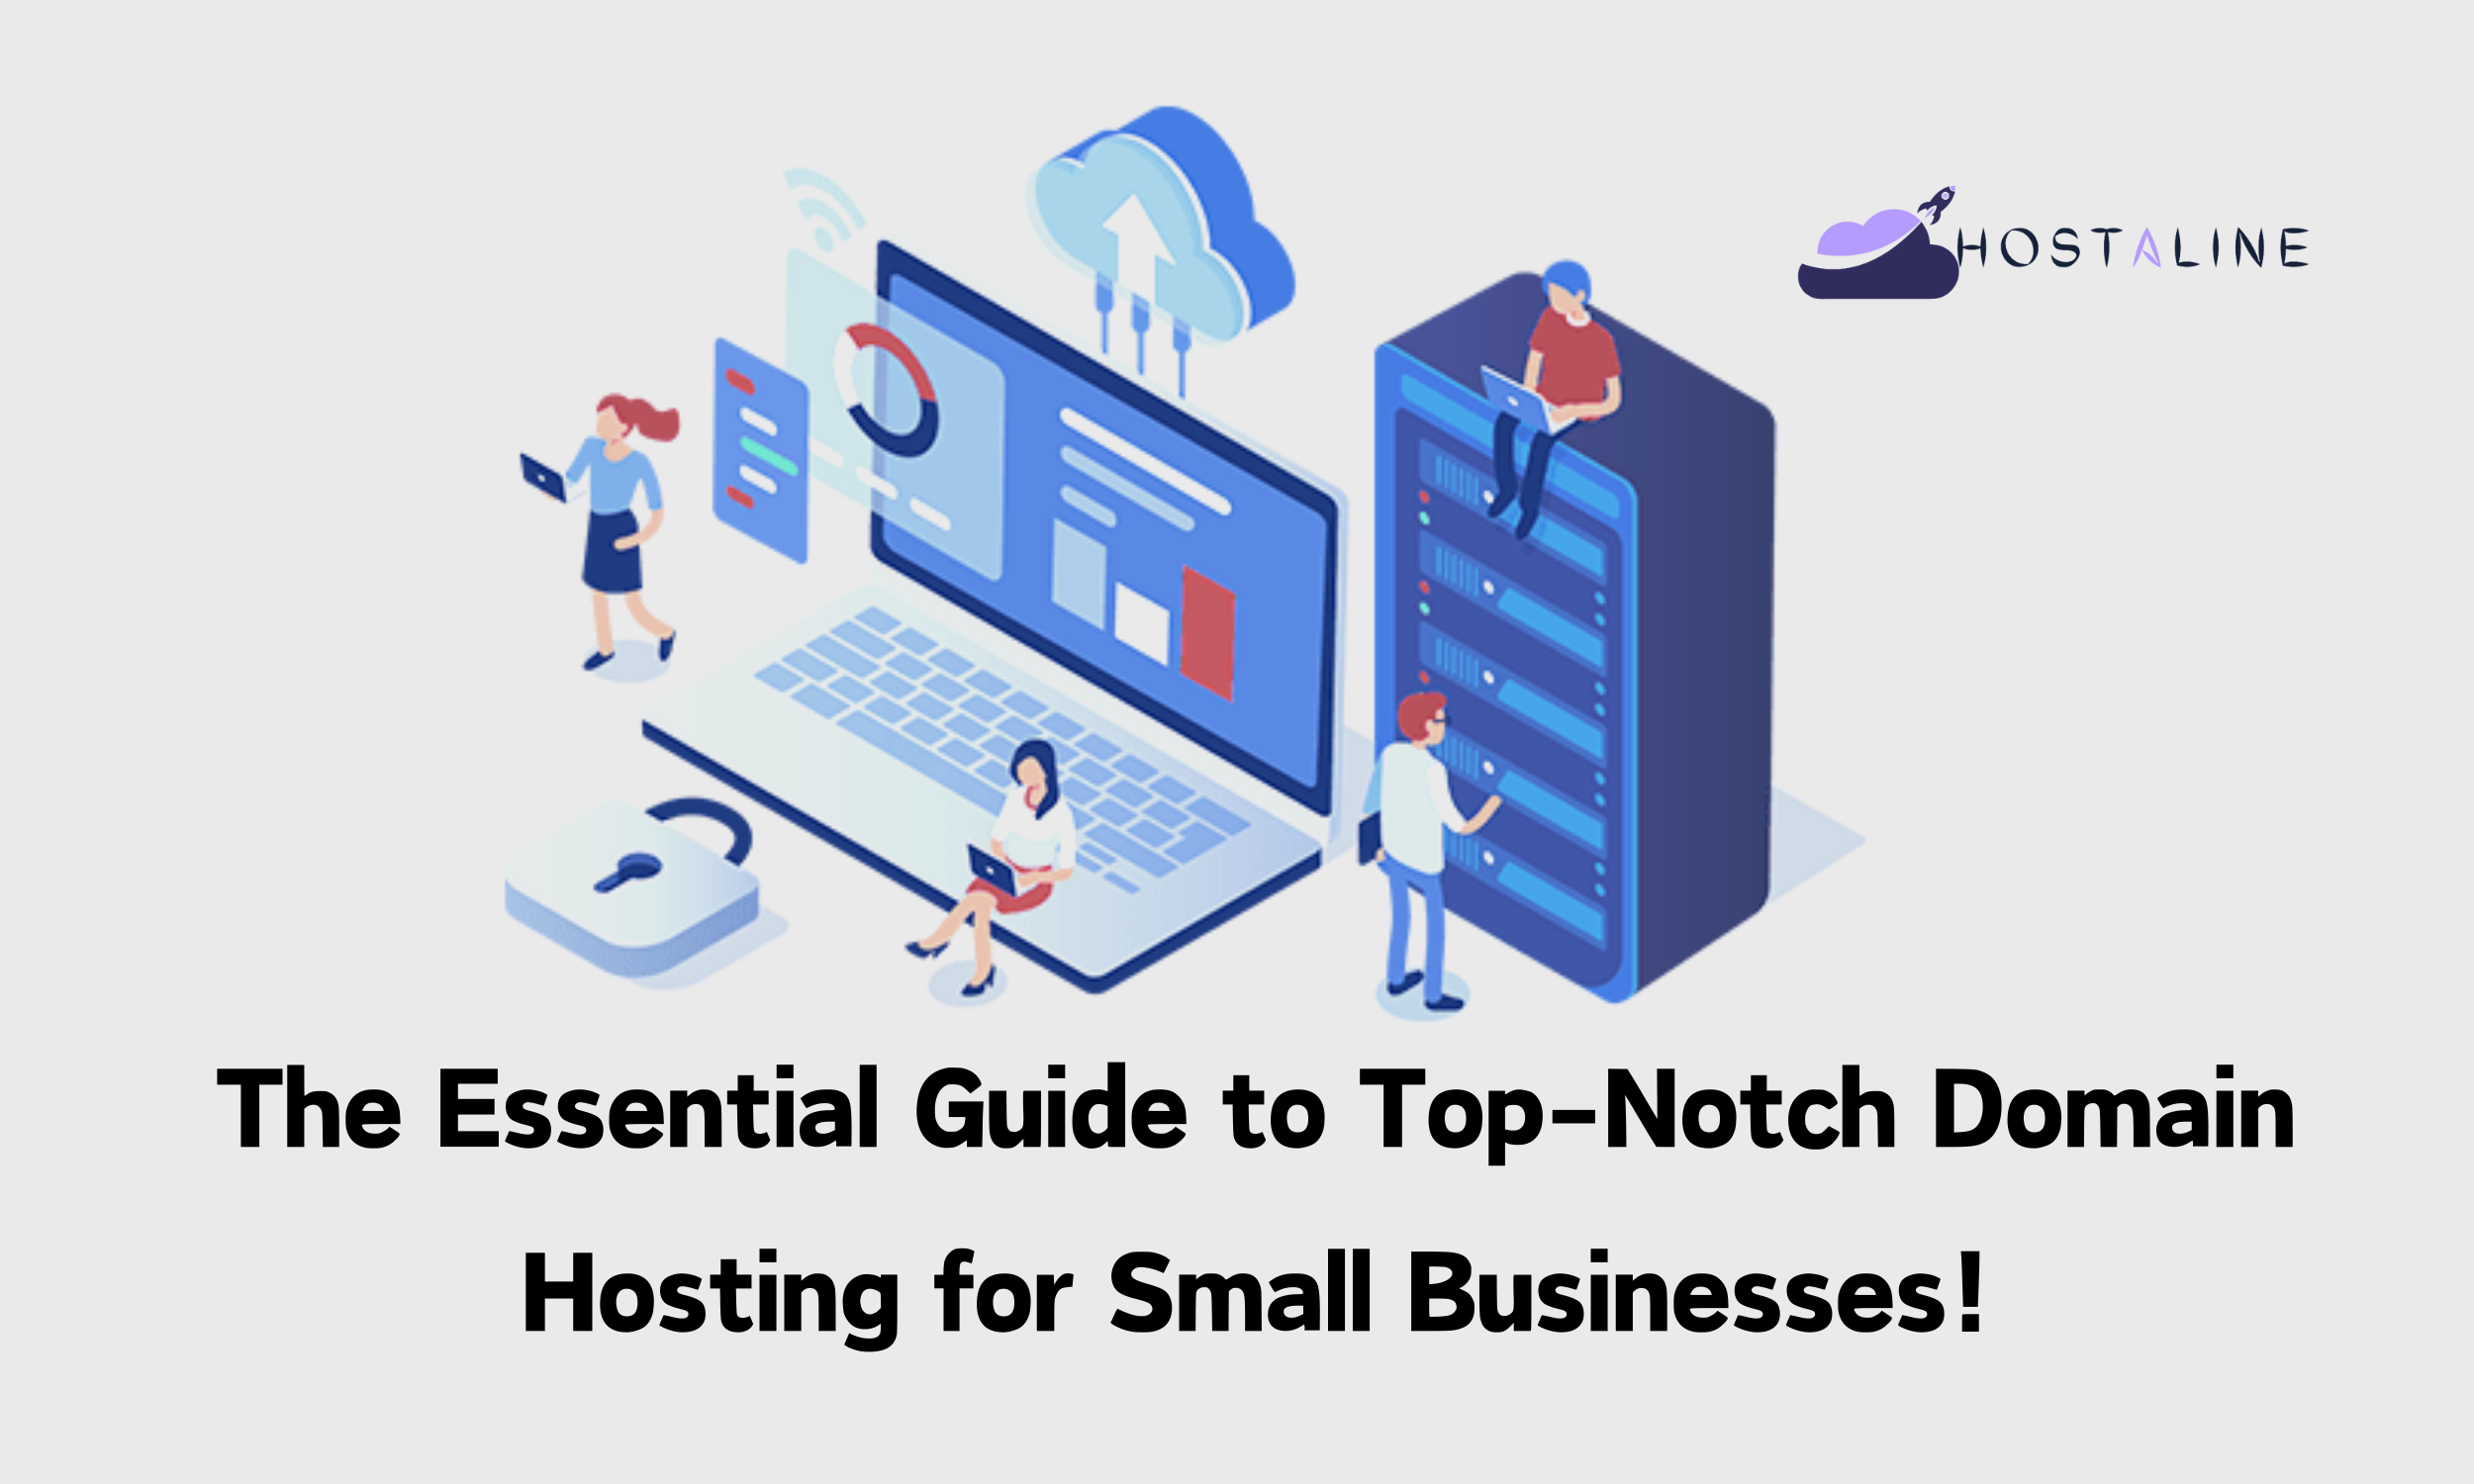 The Essential Guide to Top-Notch Domain Hosting for Small Businesses!